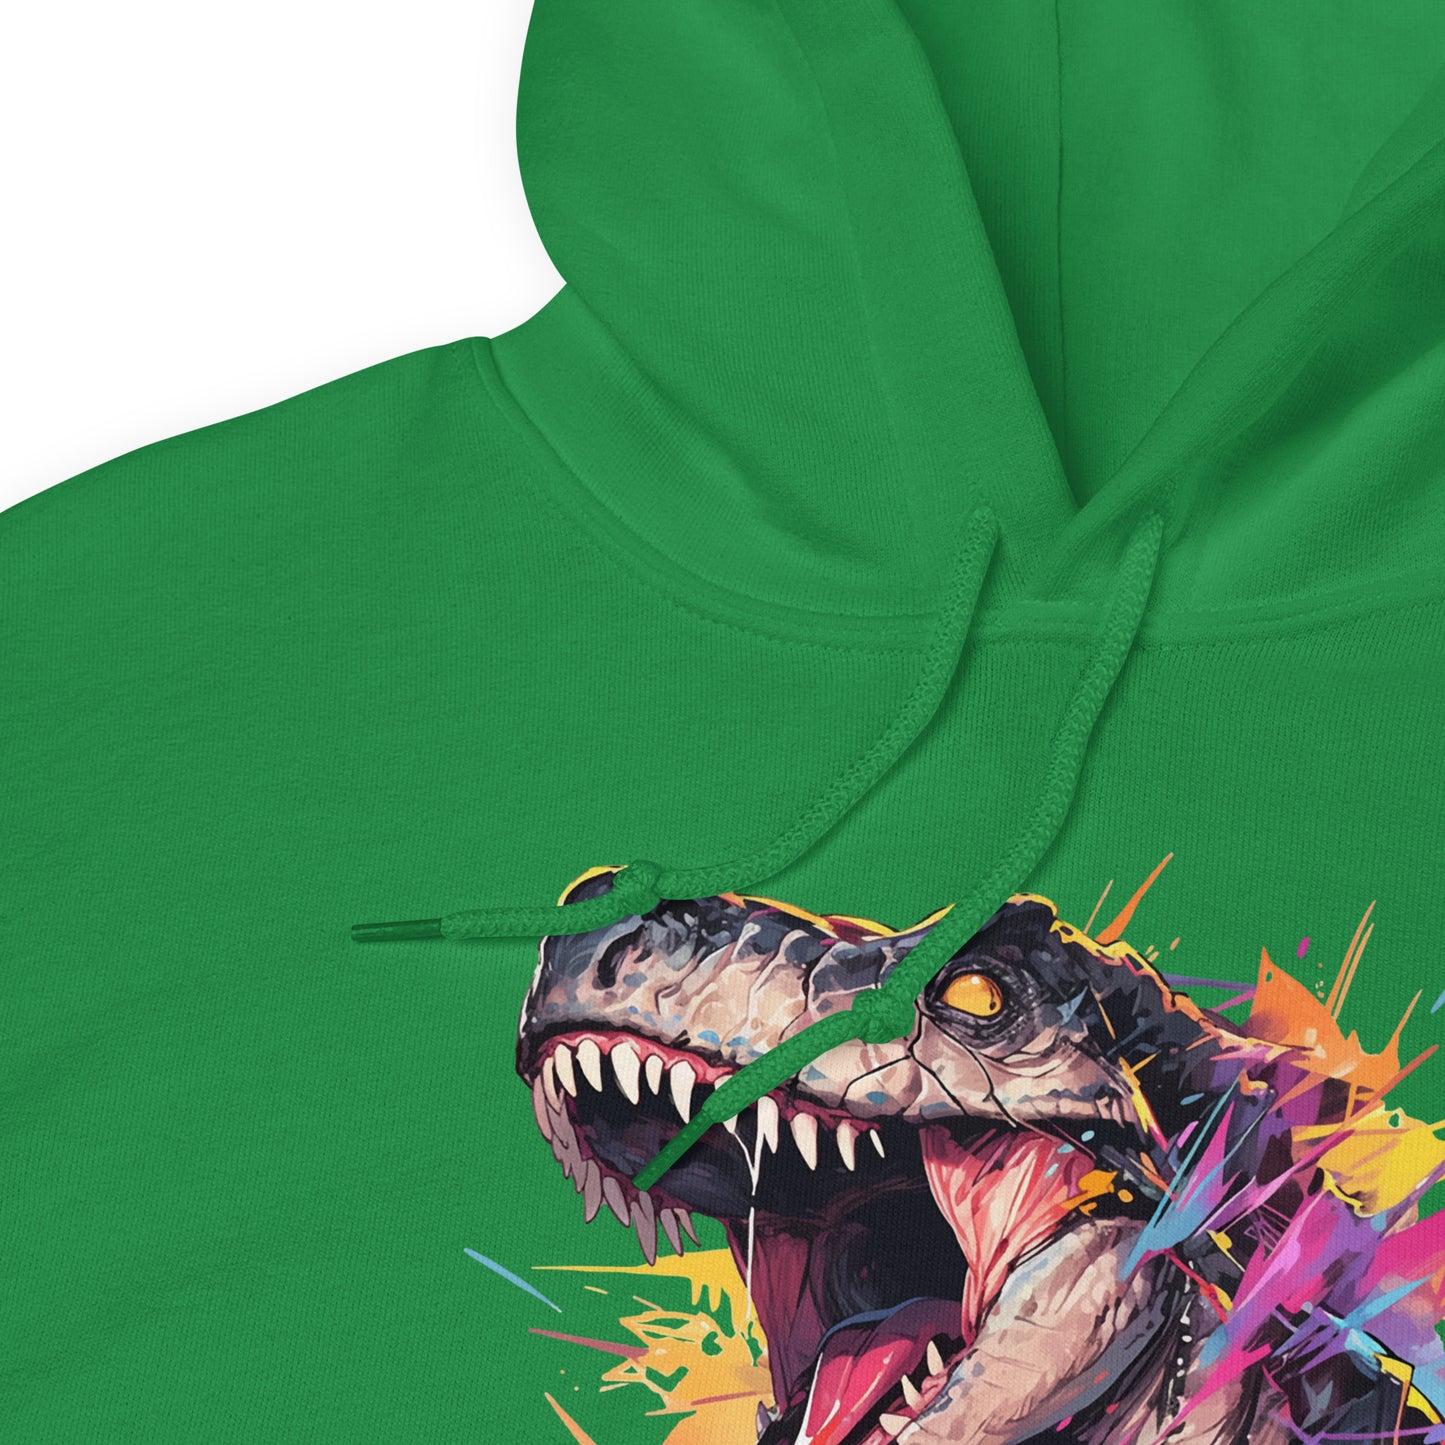 Dino and sharp teeth of hard rock, Dinosaur in leather jacket, Most music reptile in jungle, Dragon solo roar - Unisex Hoodie